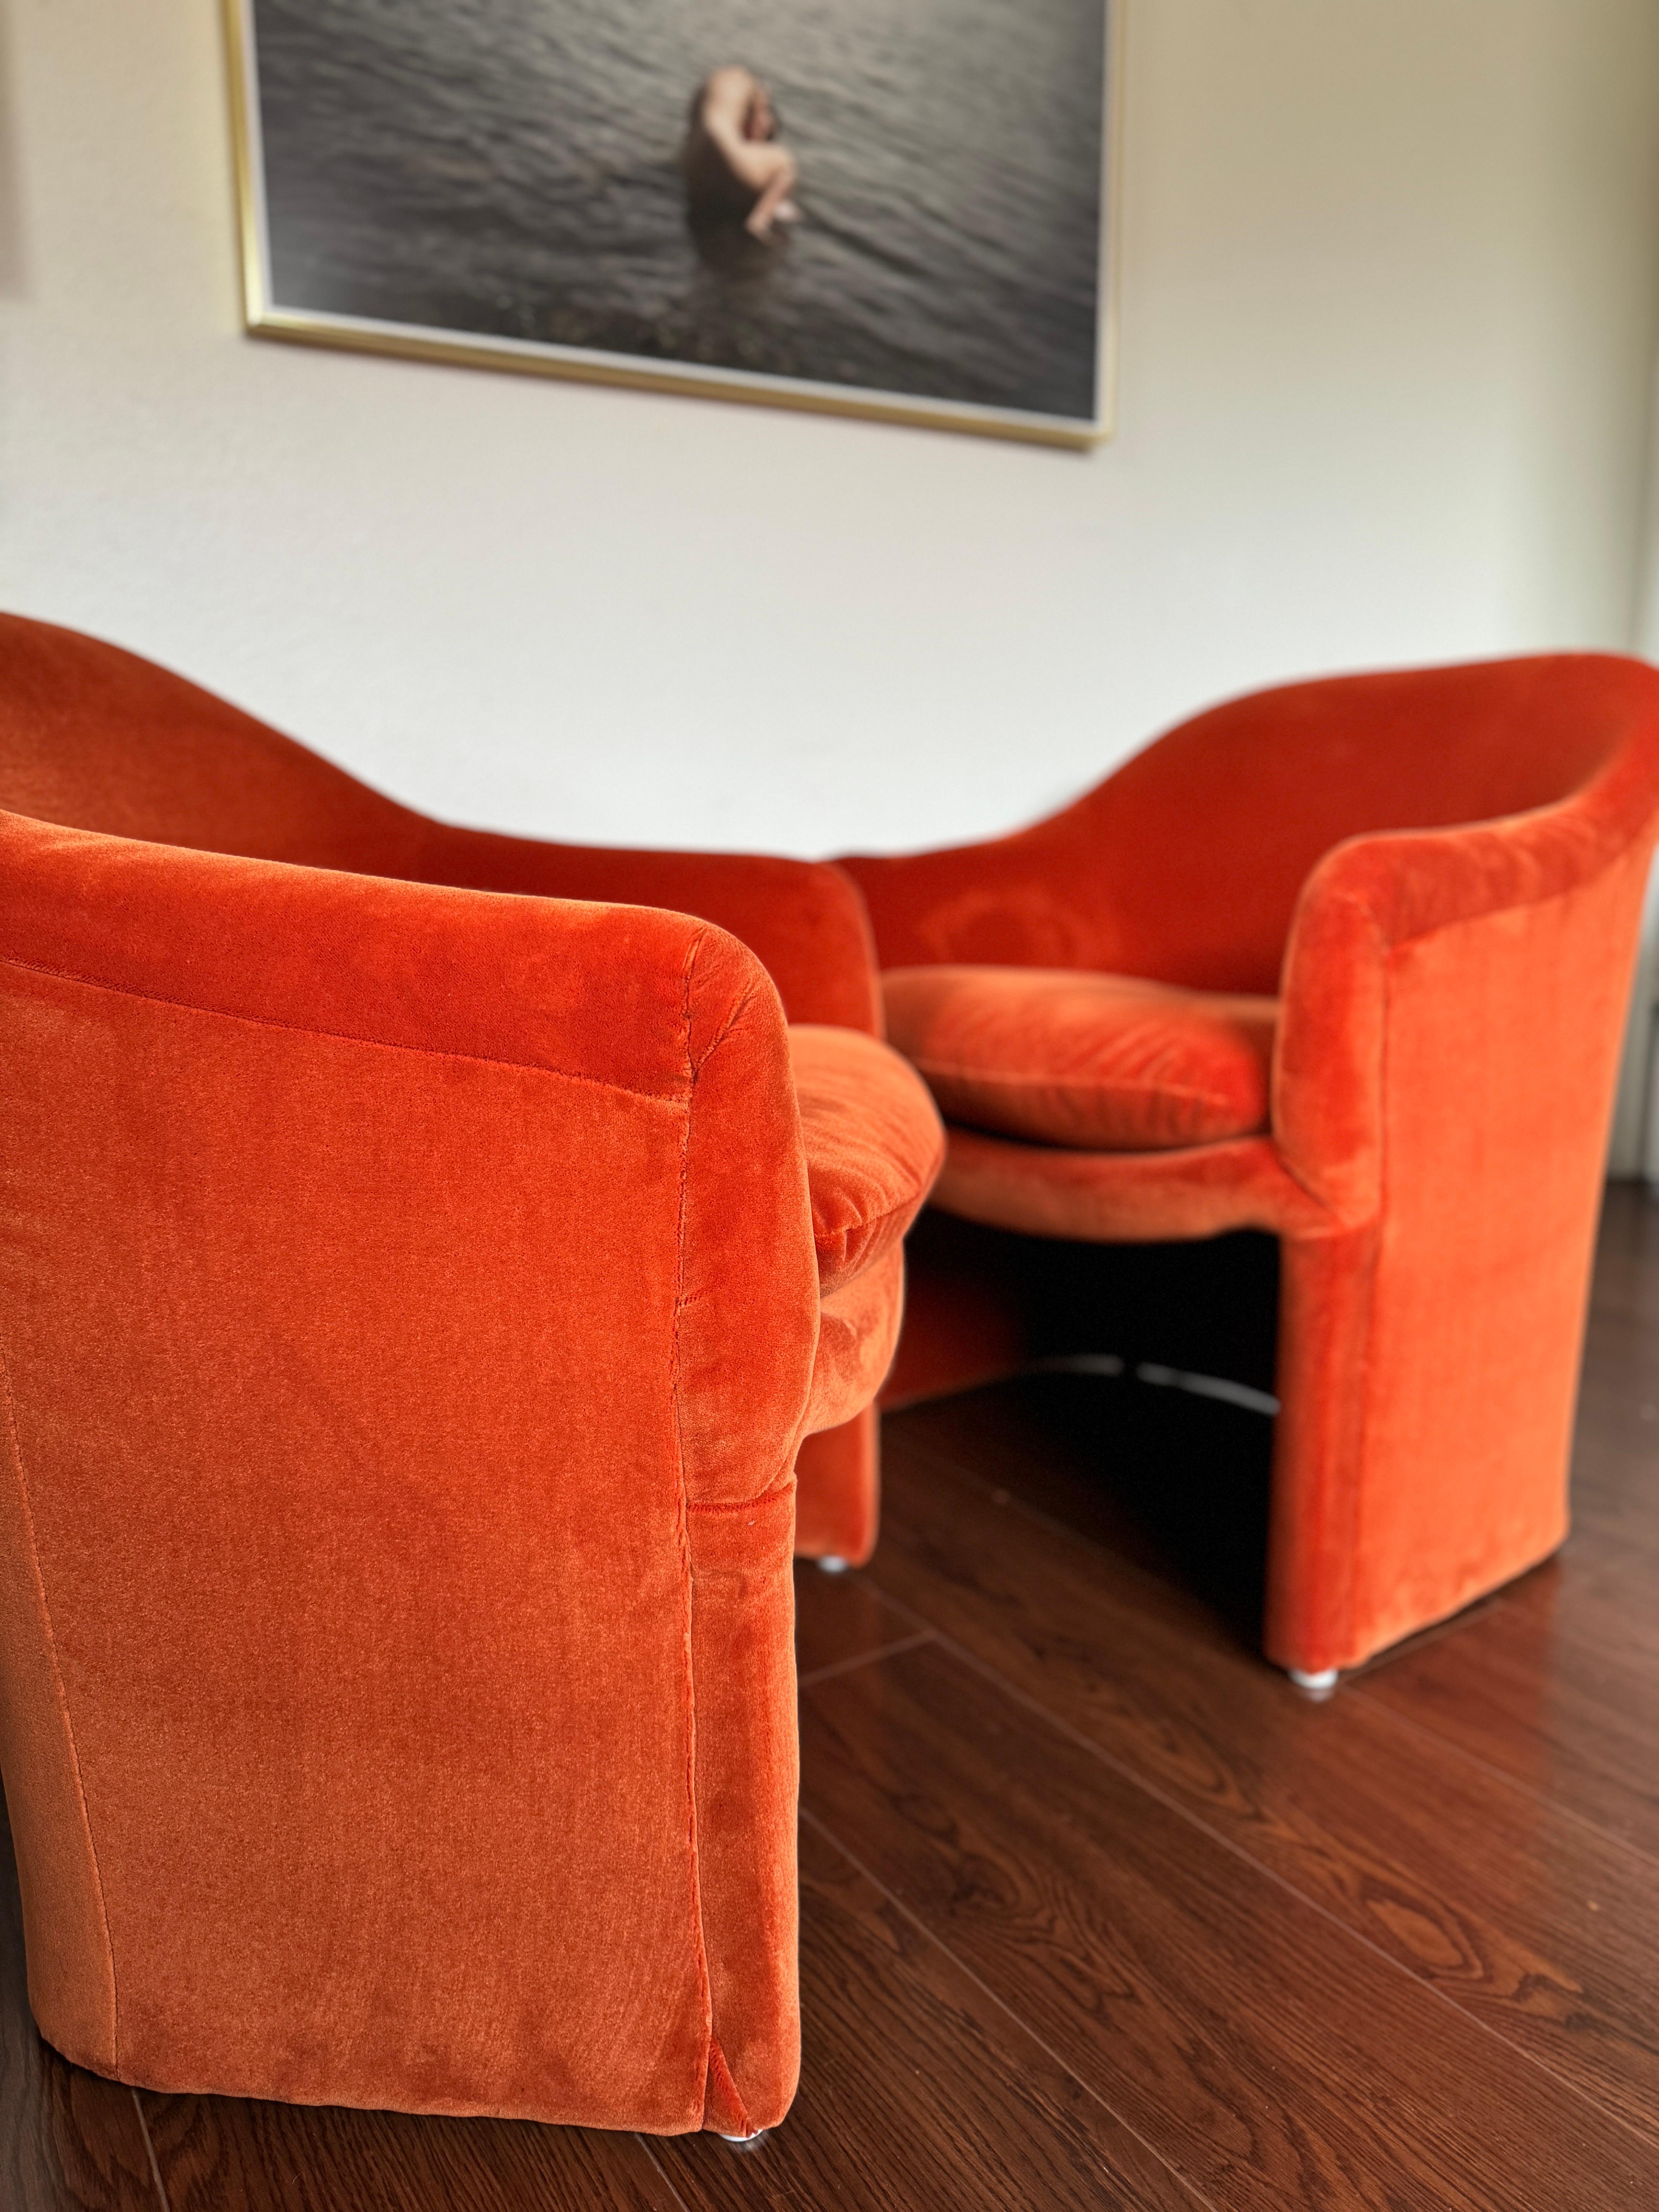 Pair of mid century modern Milo Baughman for Thayer Coggin barrel dining chairs, circa 1970s. Can also be used as living room chairs. Recently reupholstered in an orange mohair by Kravet. These chairs originally came with casters, but I had them